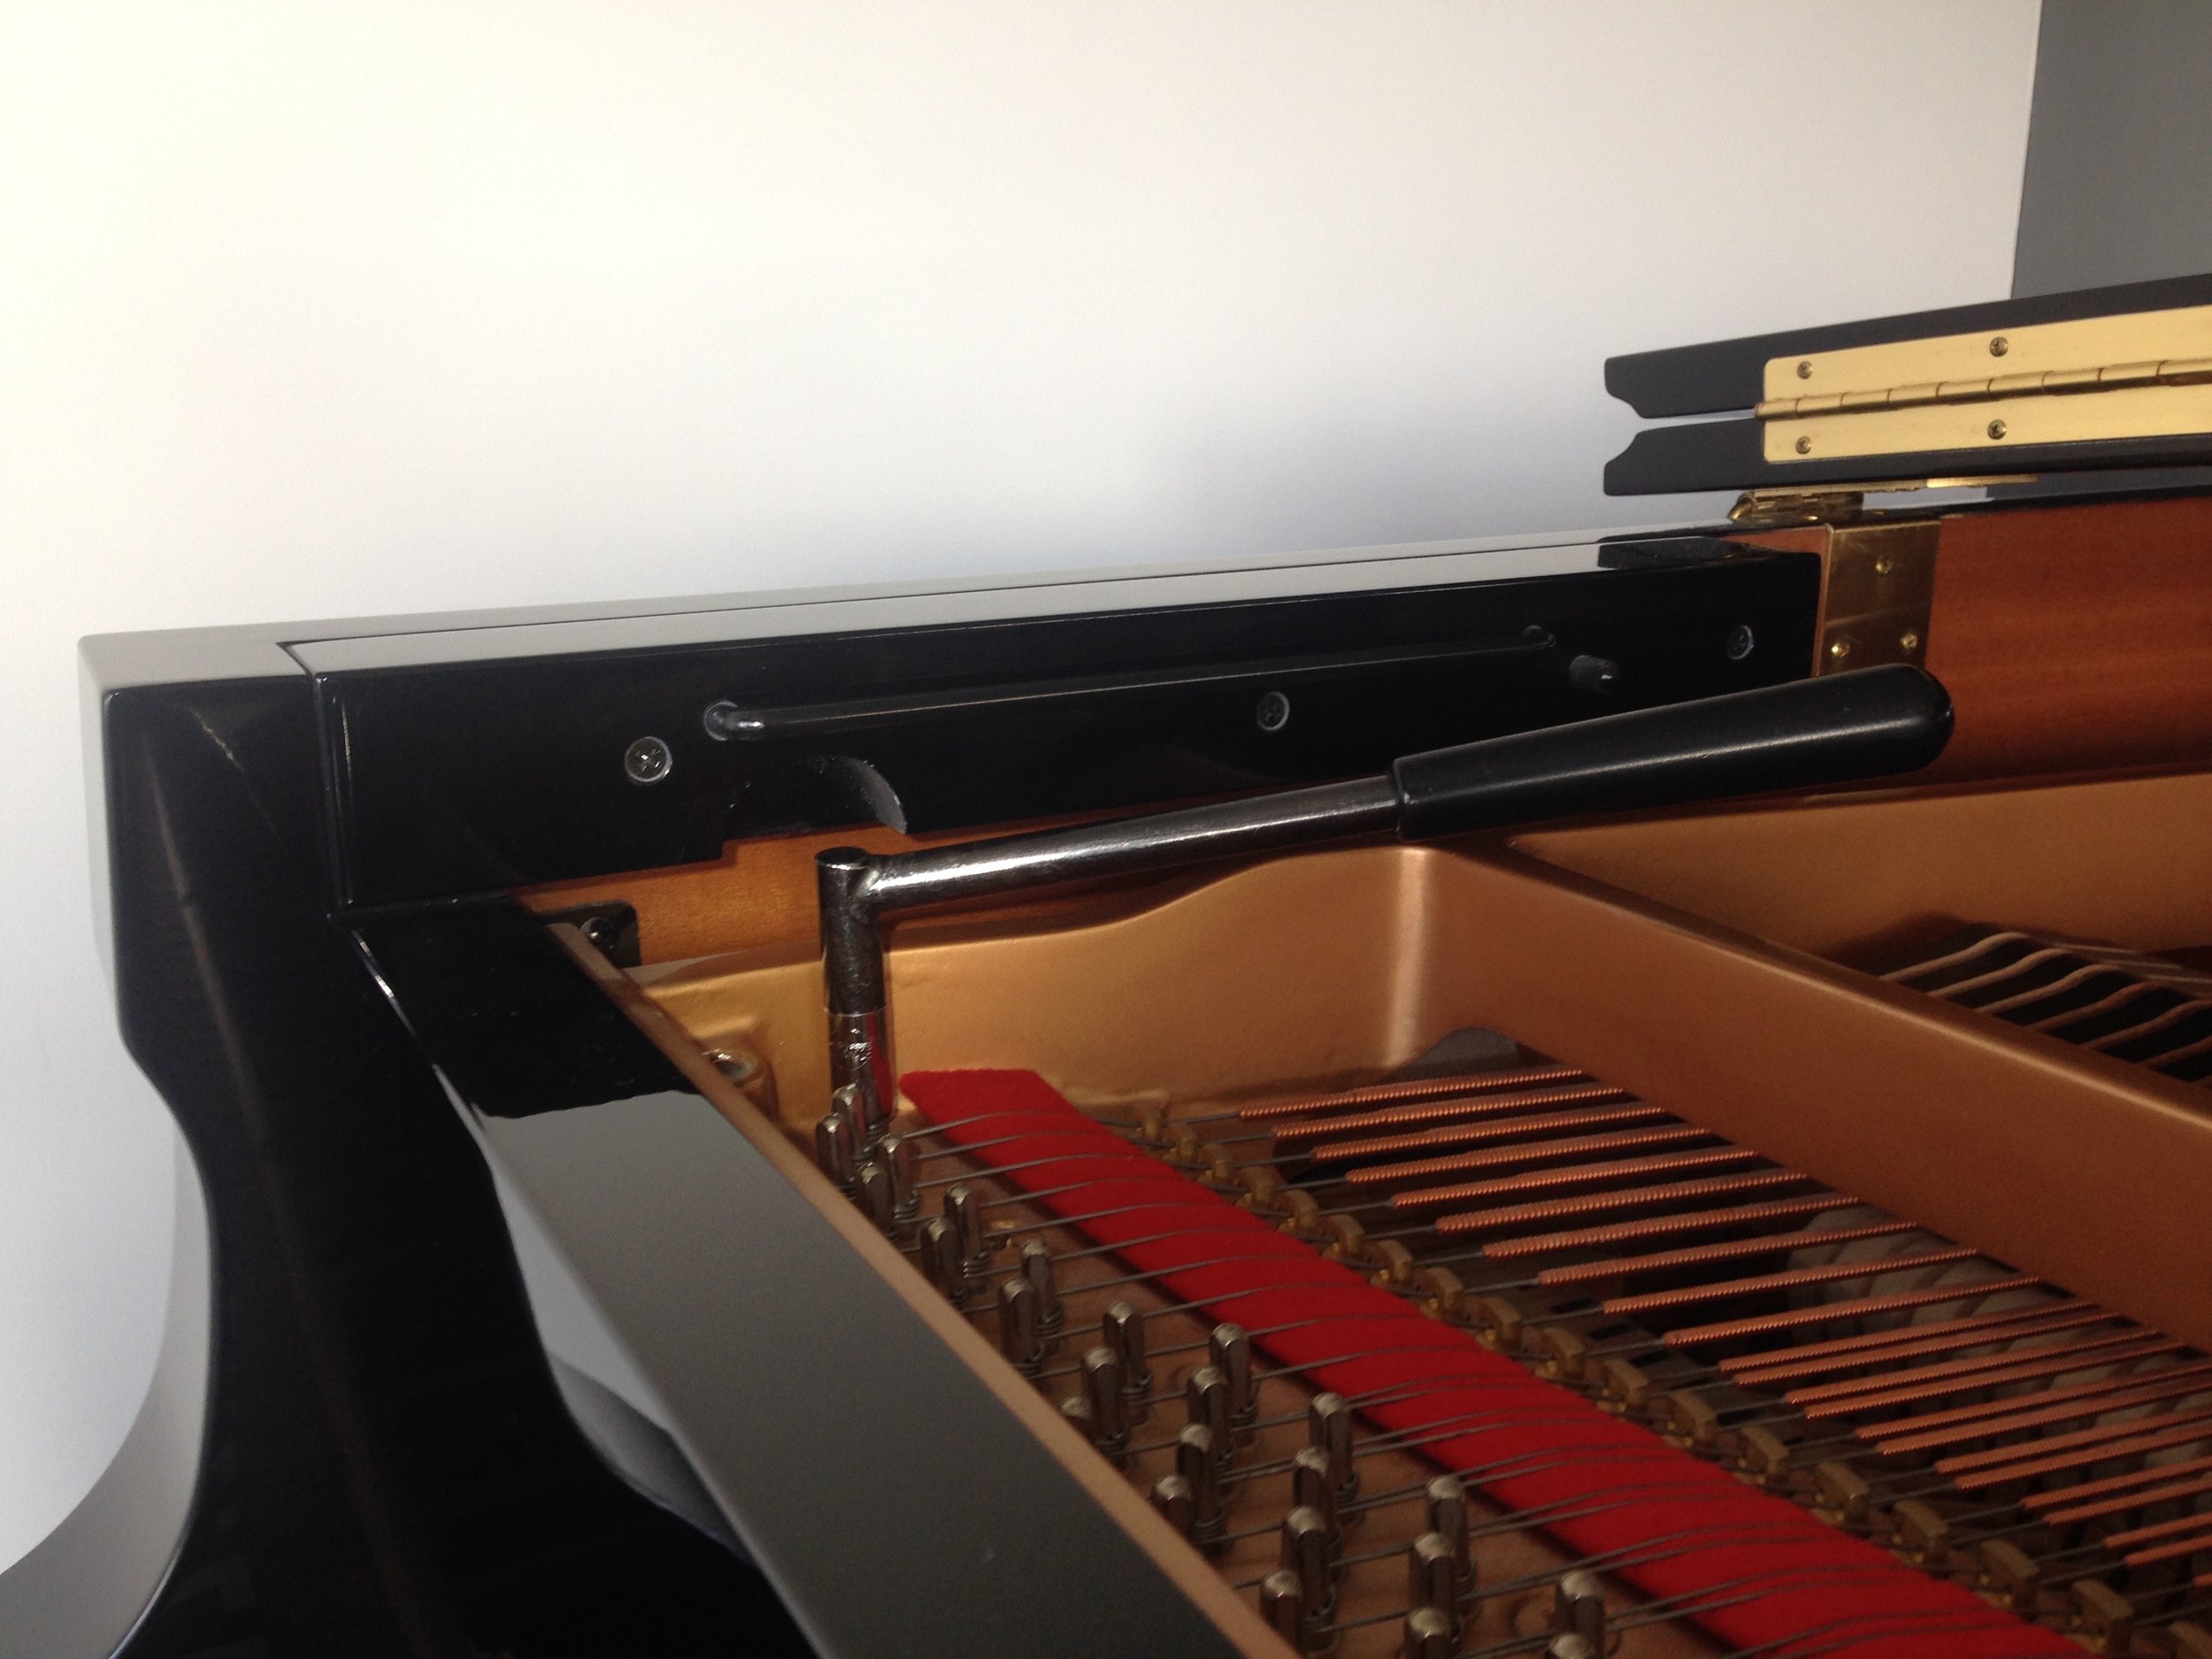 The Utility fits easily under the music desk guide of this Yamaha grand...